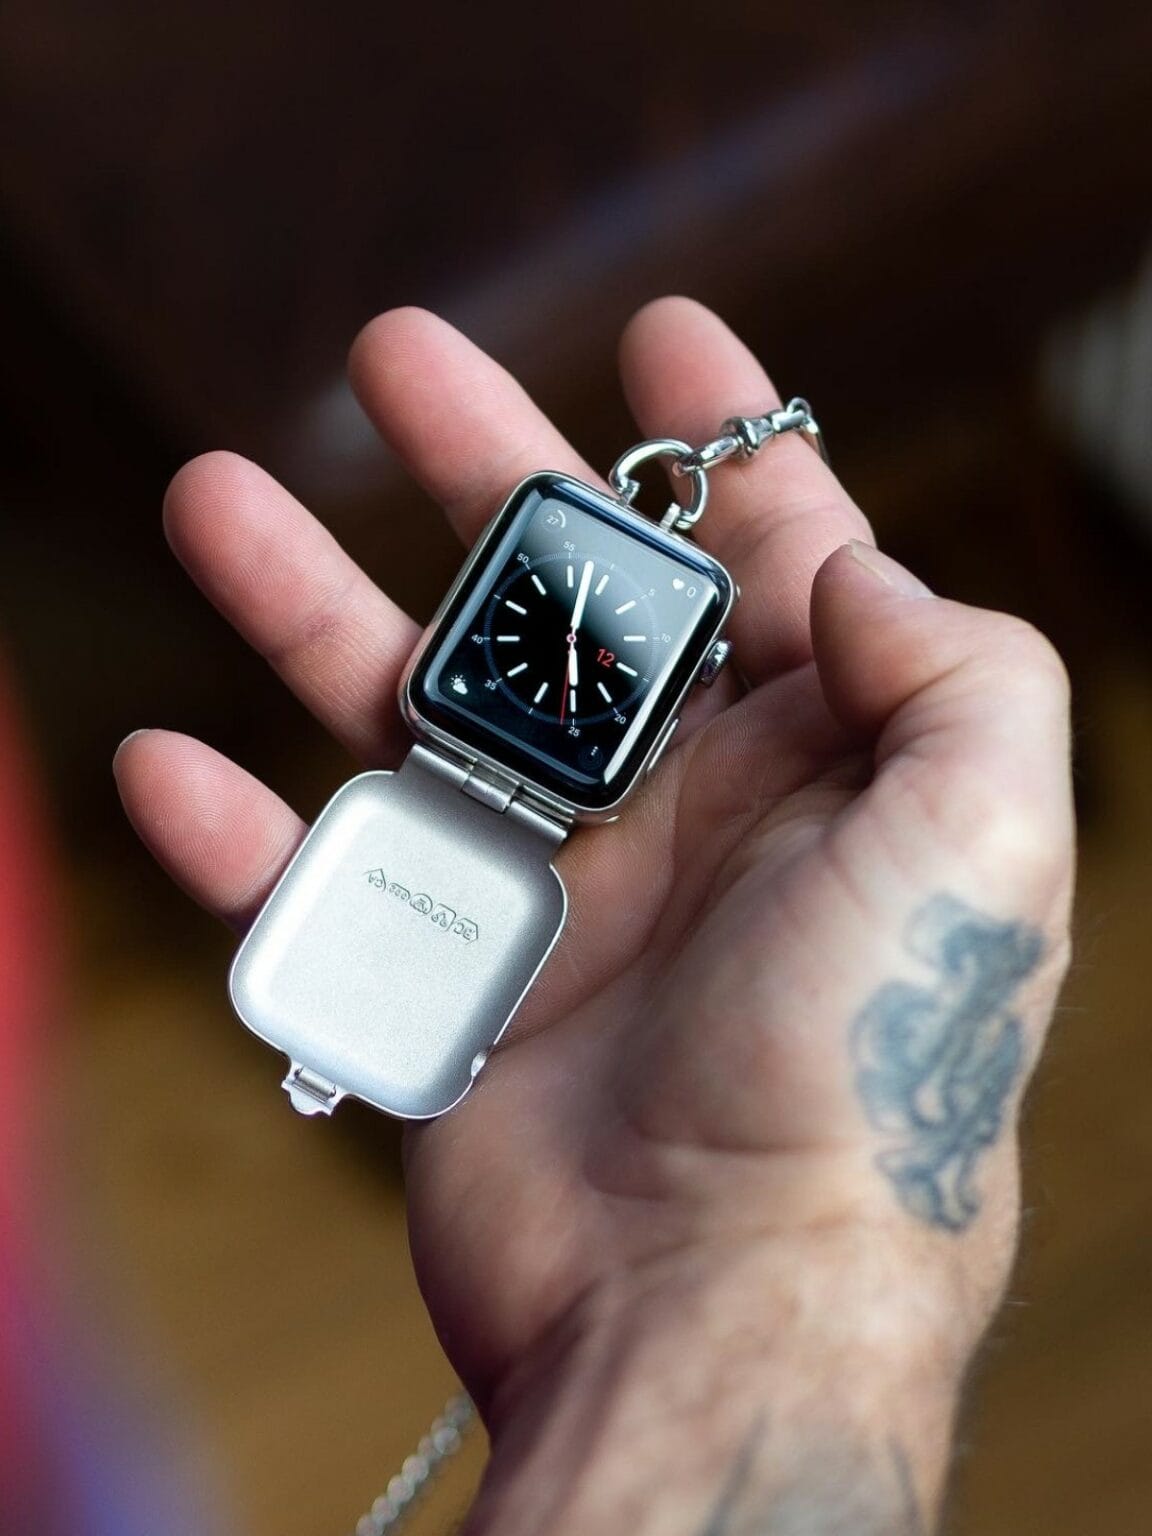 Giveaway: The Bucardo pocket watch case turns the Apple Watch into a timeless classic, right at your fingertips.